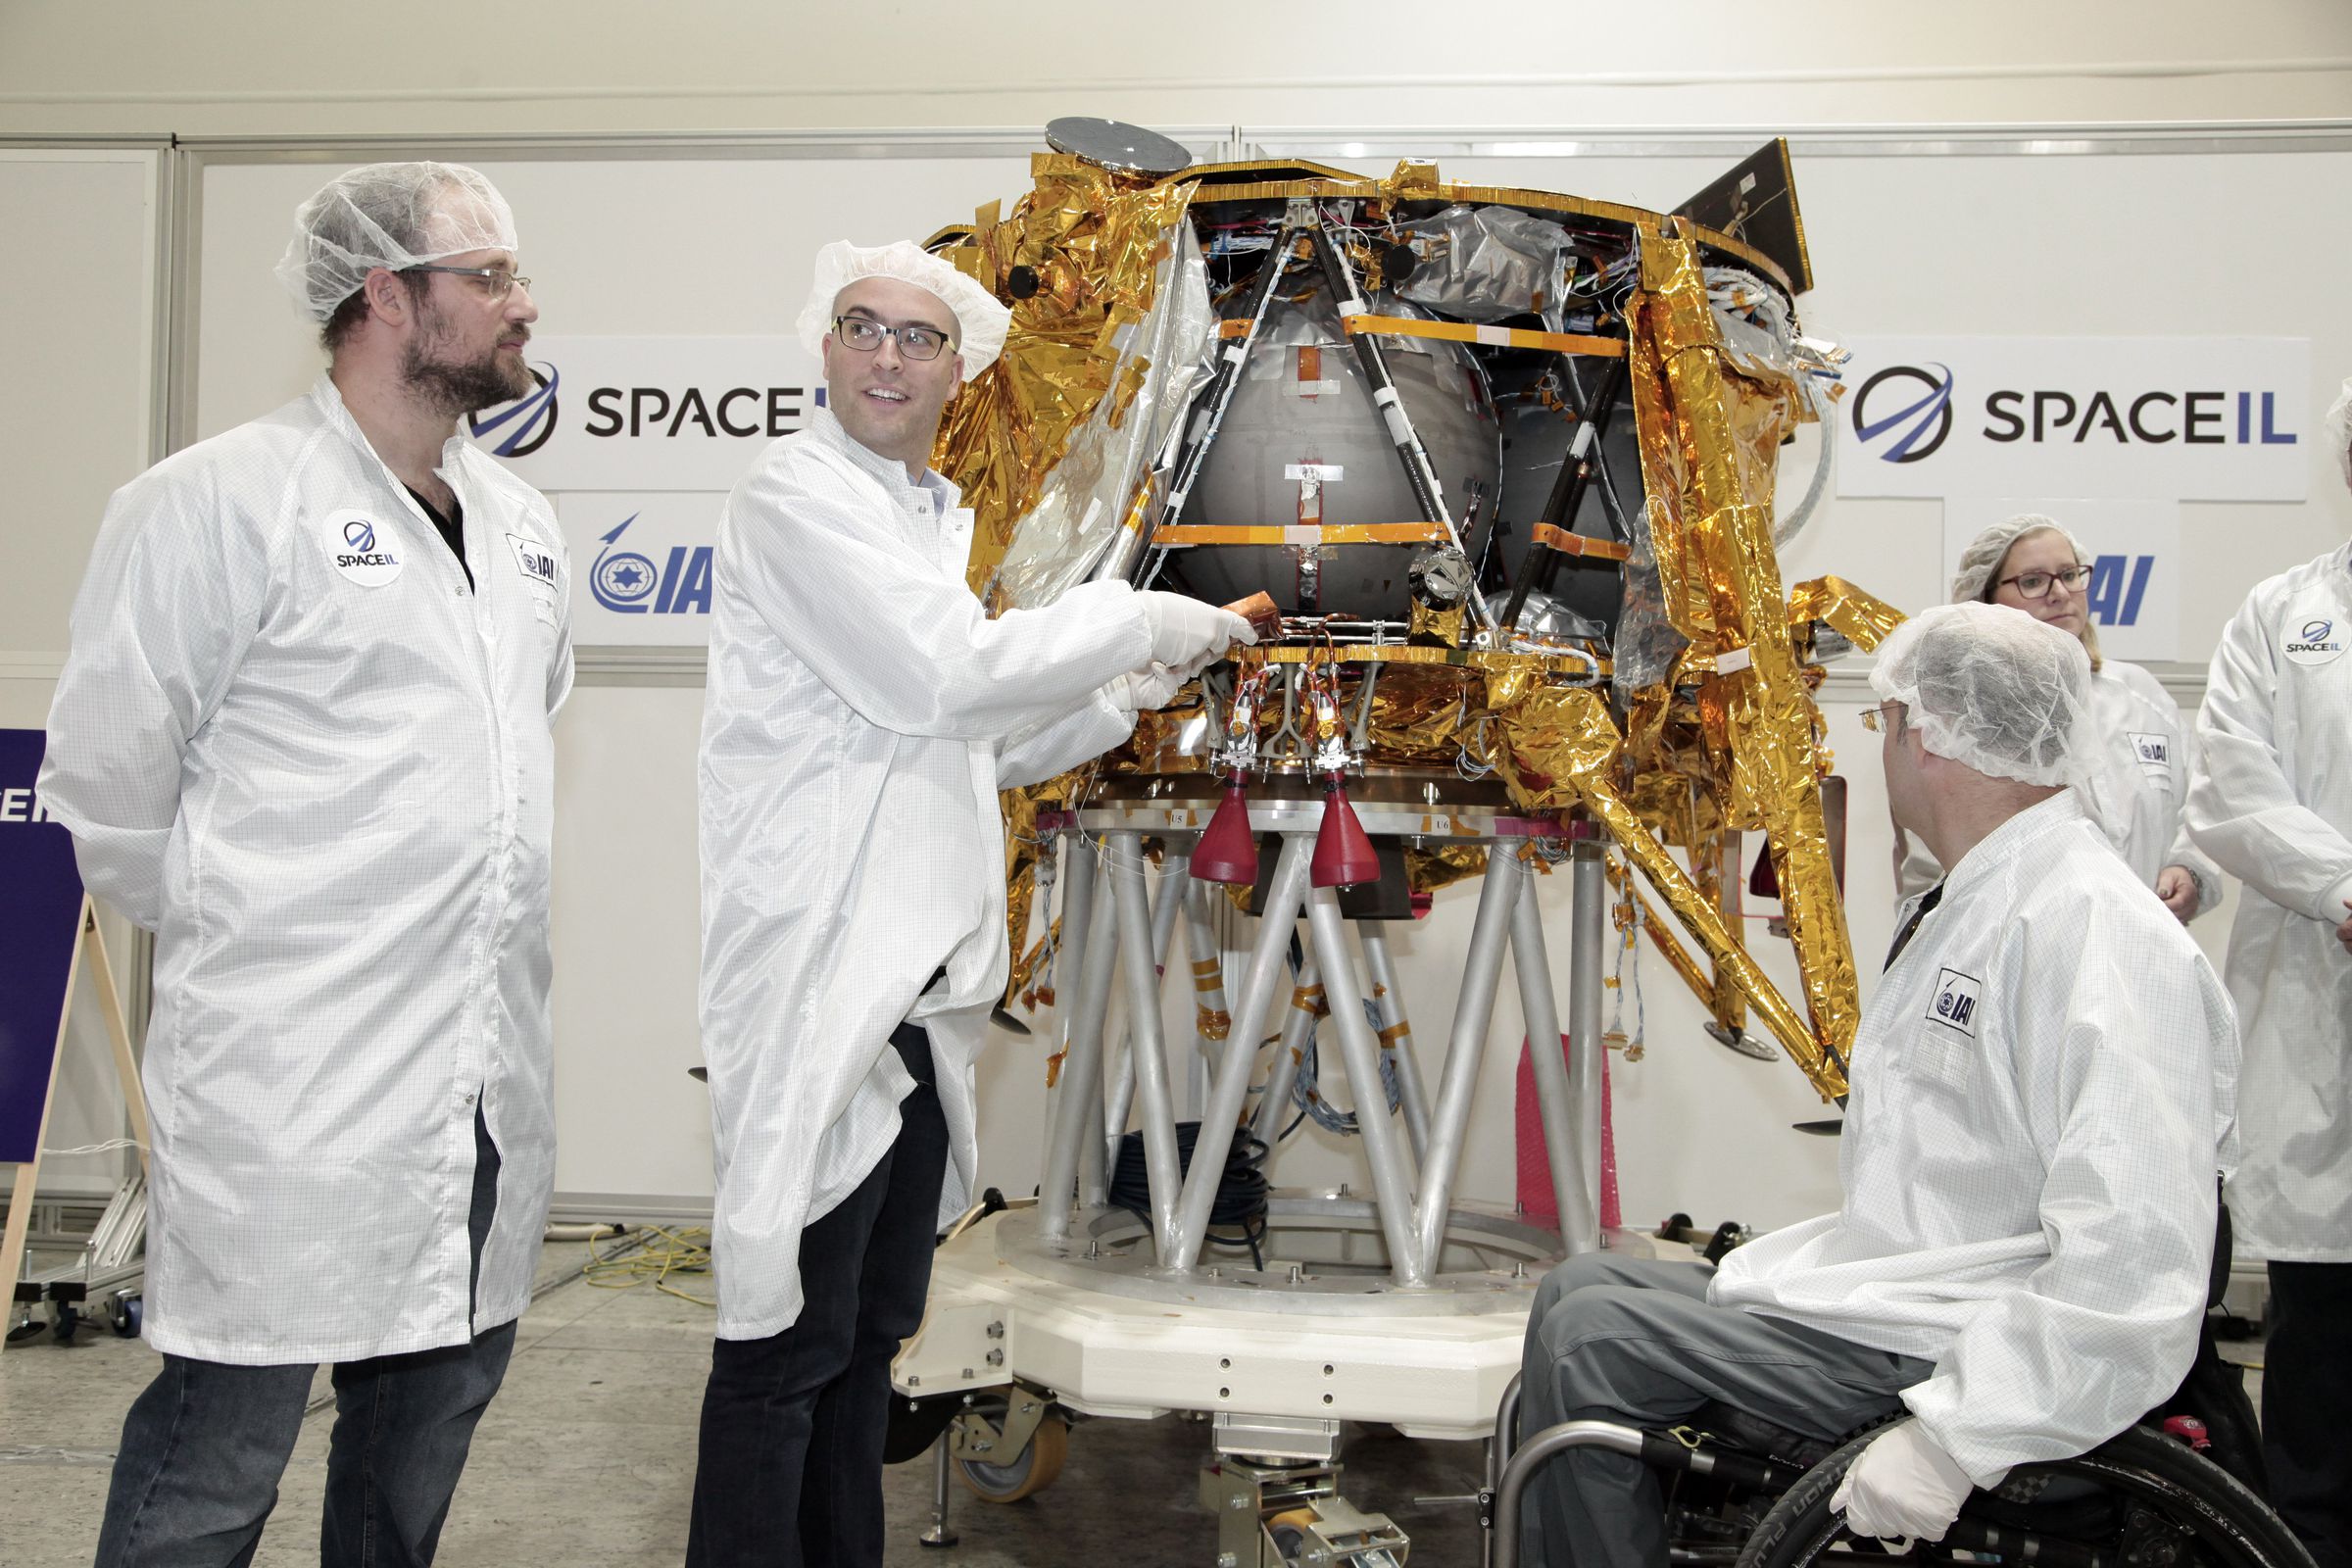 The SpaceIL team with the lunar lander.